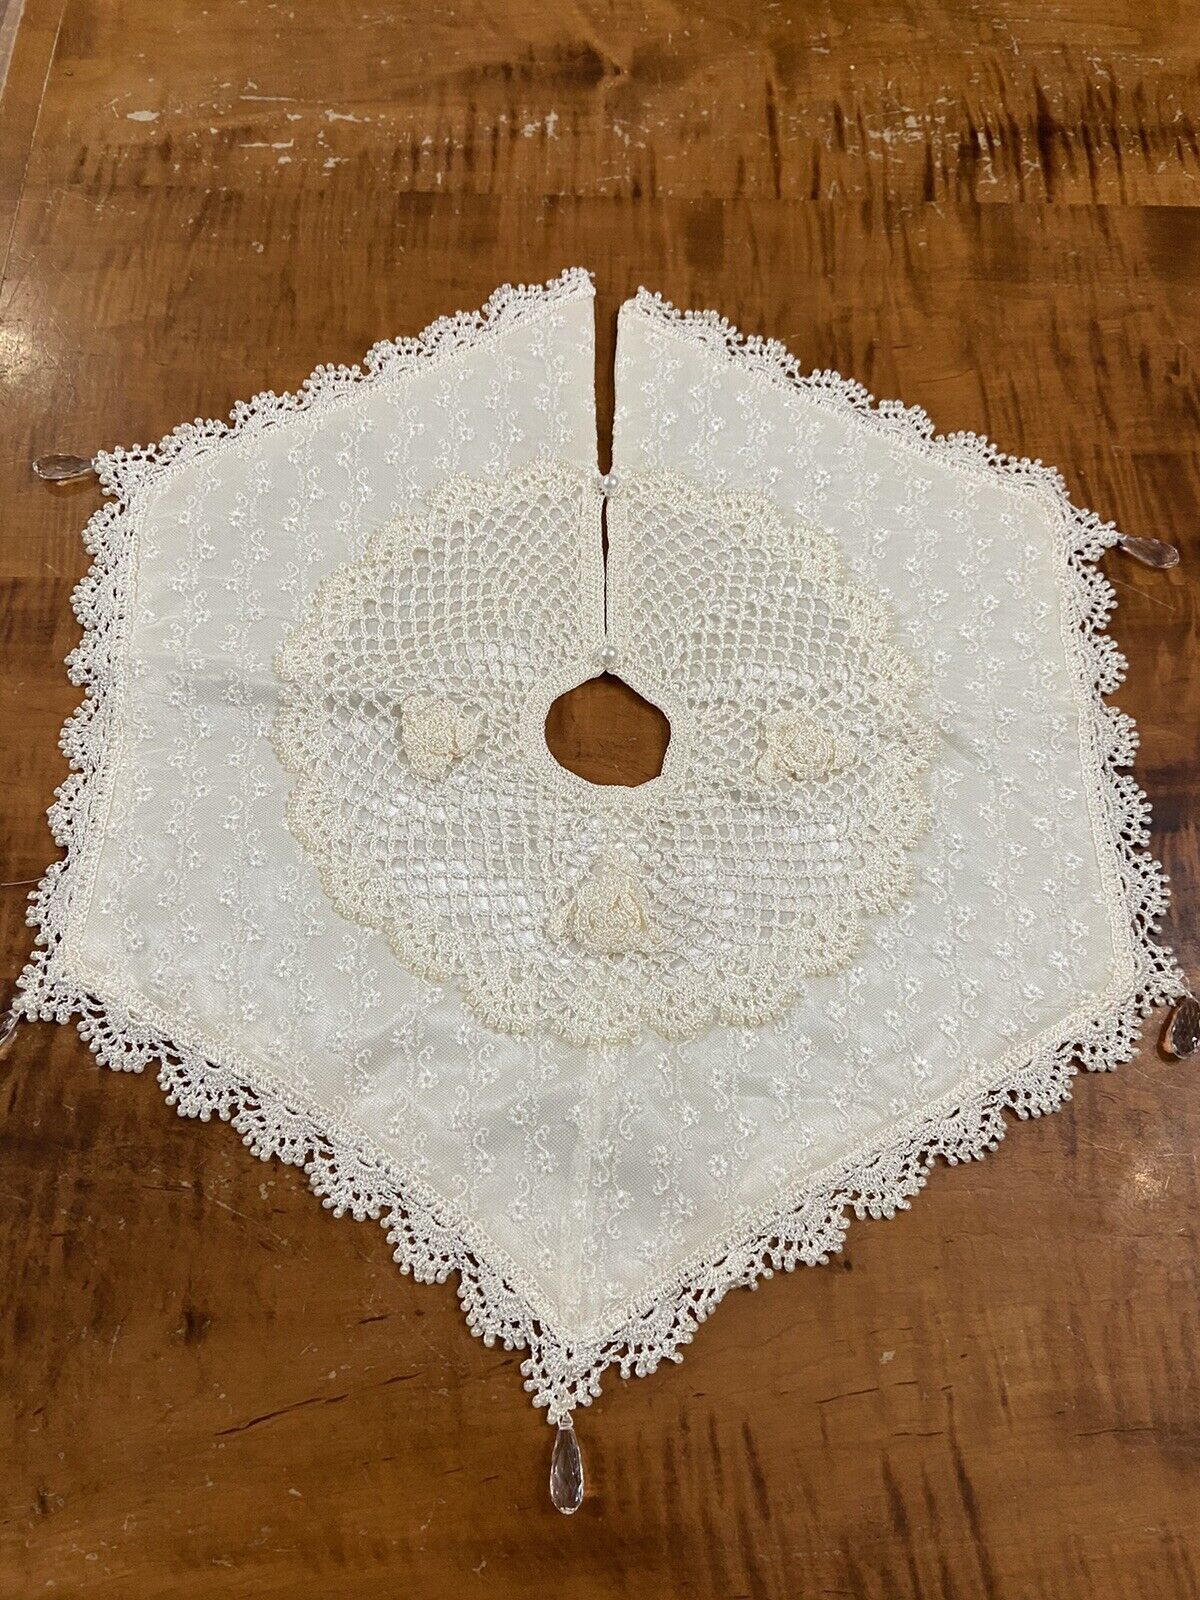 Vint Hand Crocheted Lined Ecru Christmas Tree Skirt 21” By 19” Victorian Country